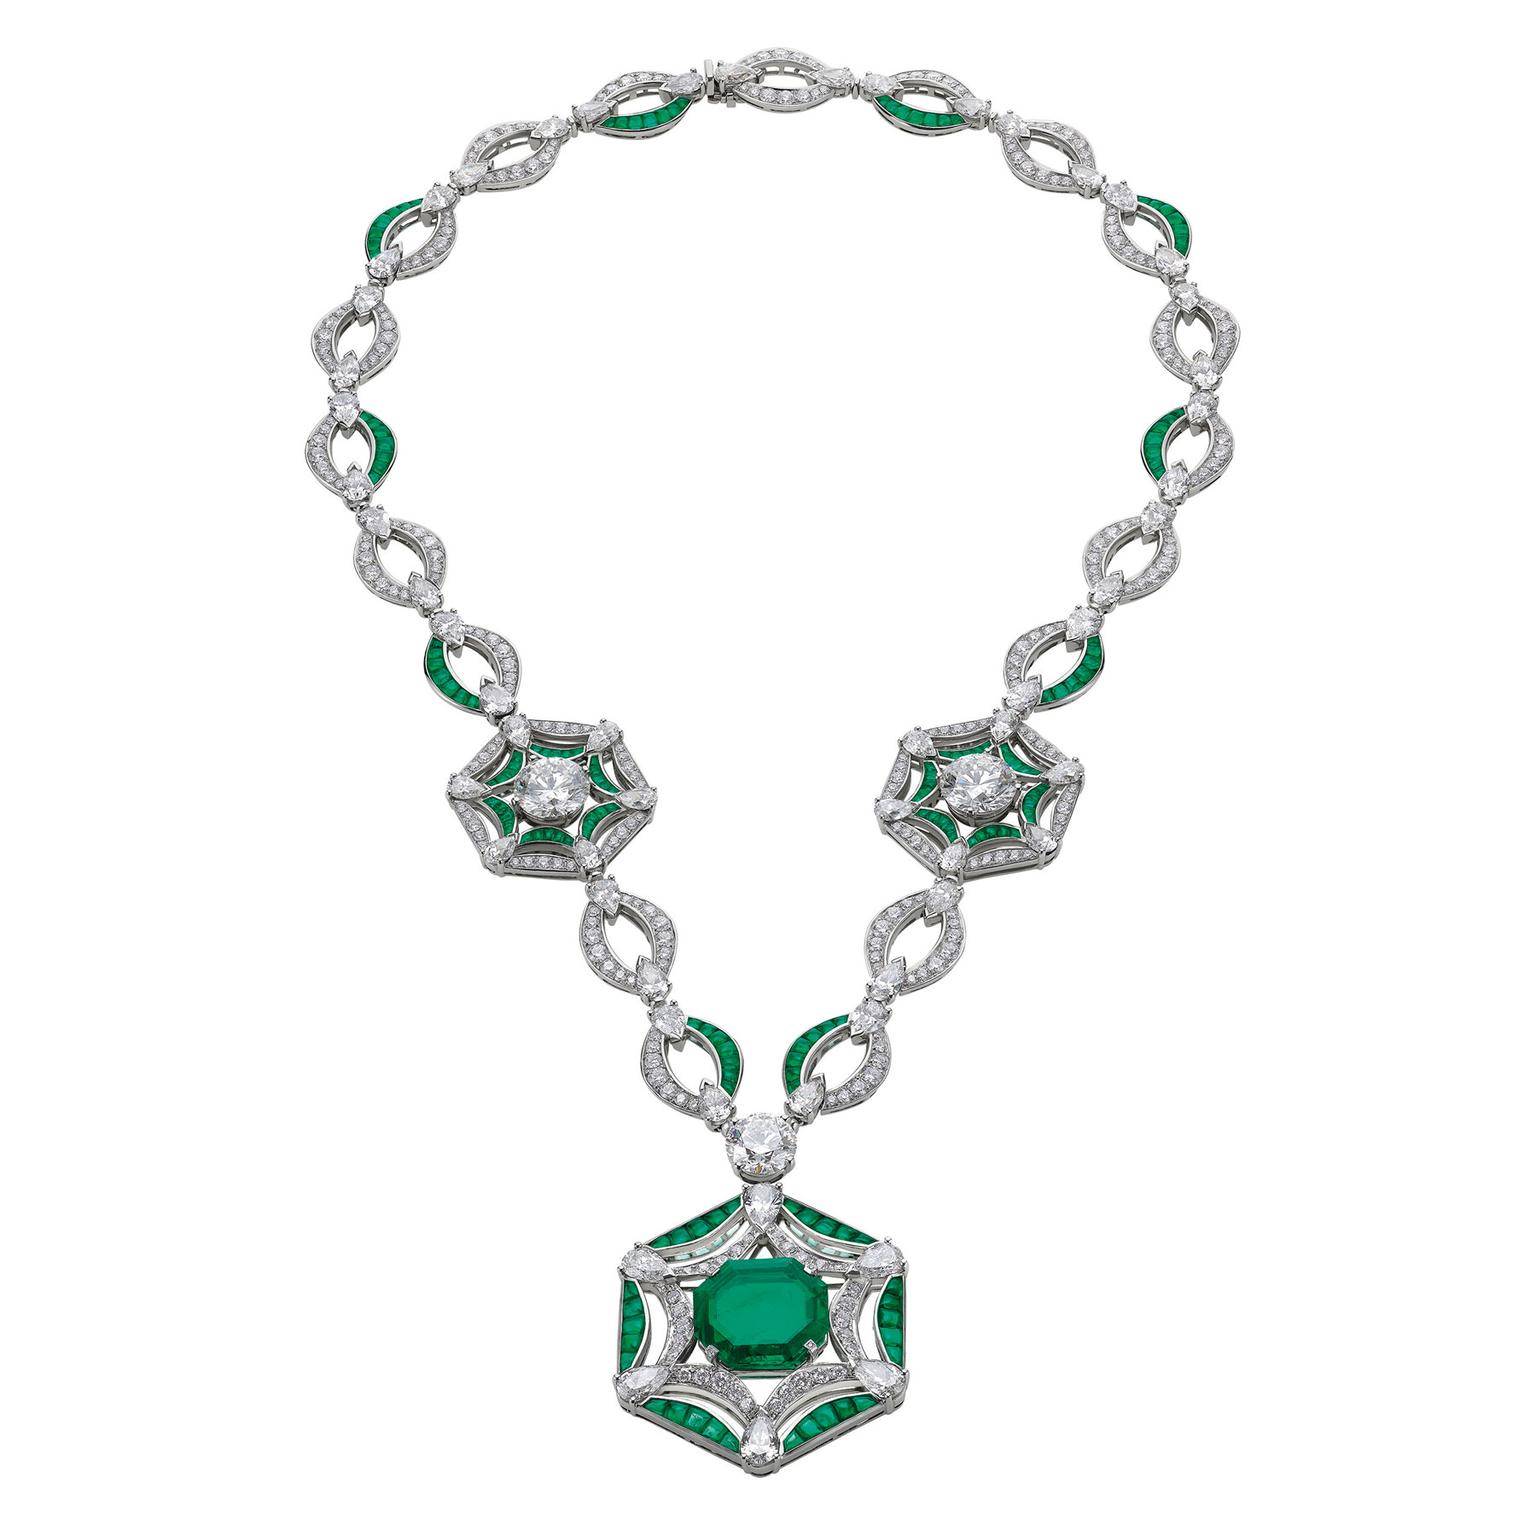 Necklace ideas are timeless accessories that have adorned human necks for centuries, serving as symbols of beauty, status, and cultural significance.